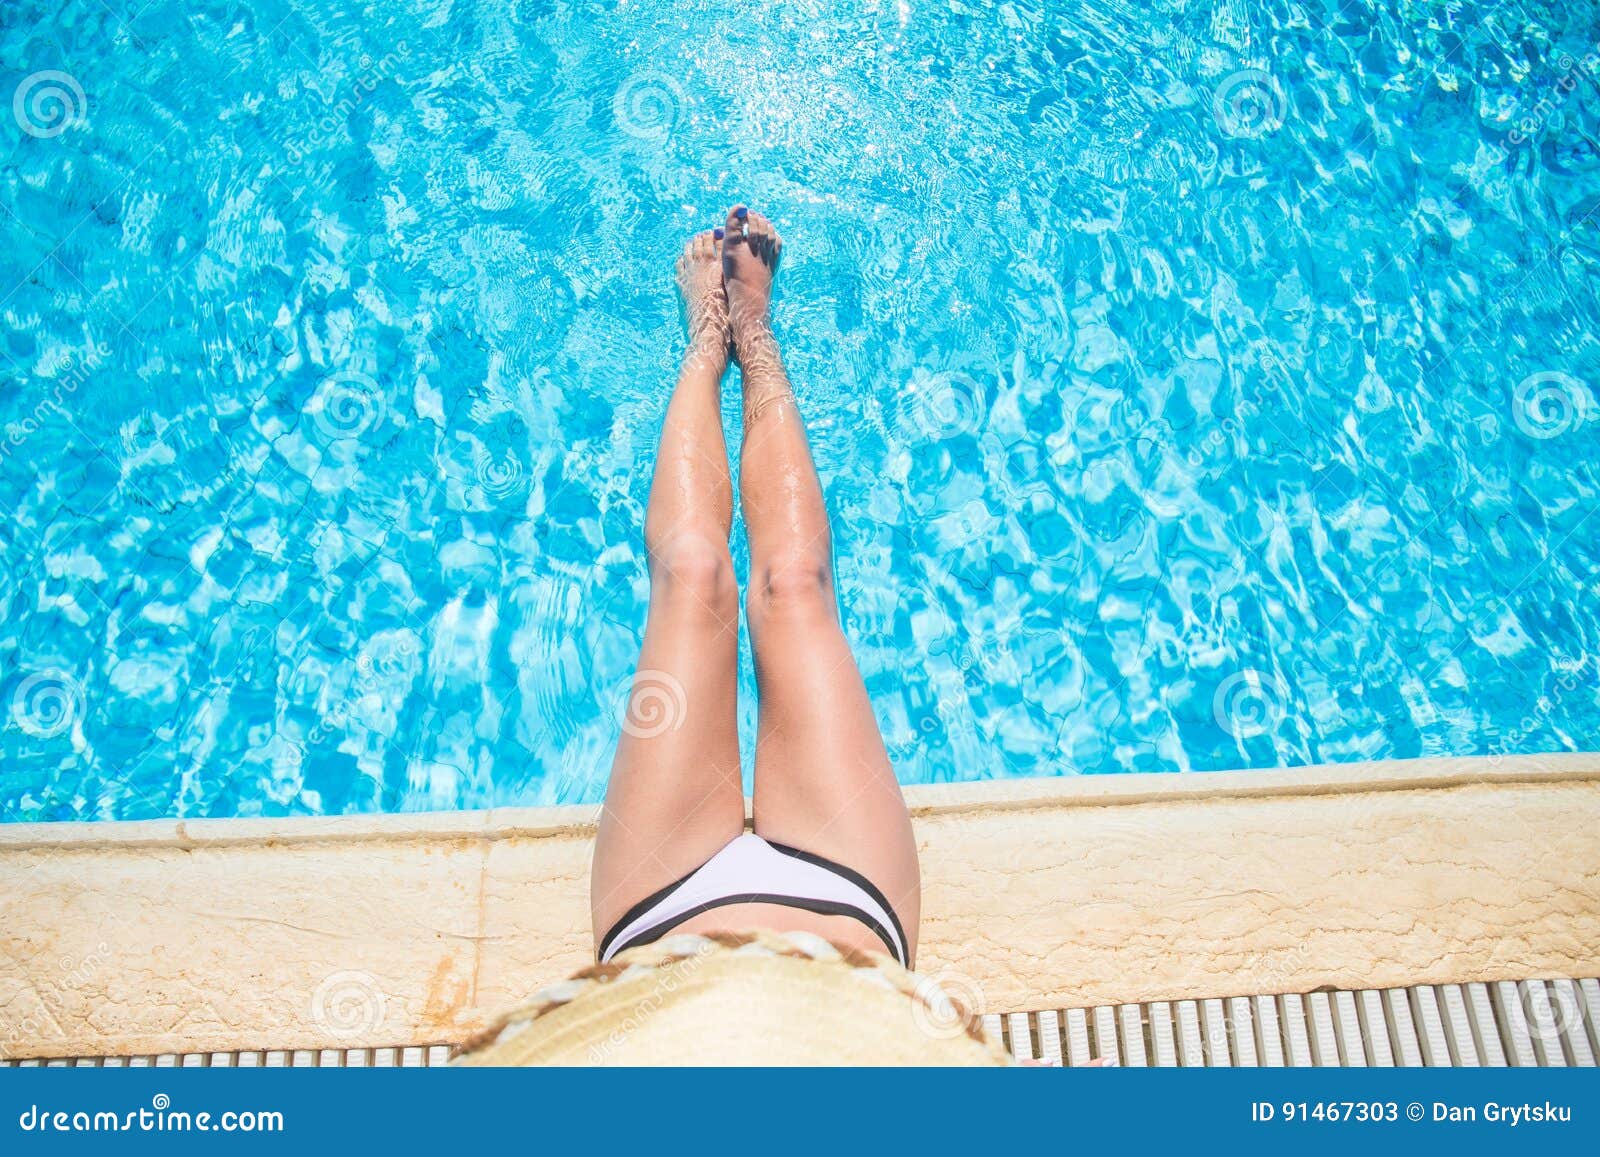 Top View Young Woman Sunbathing Near Swimming Pool Top View Of Legs Near Pool Stock Image